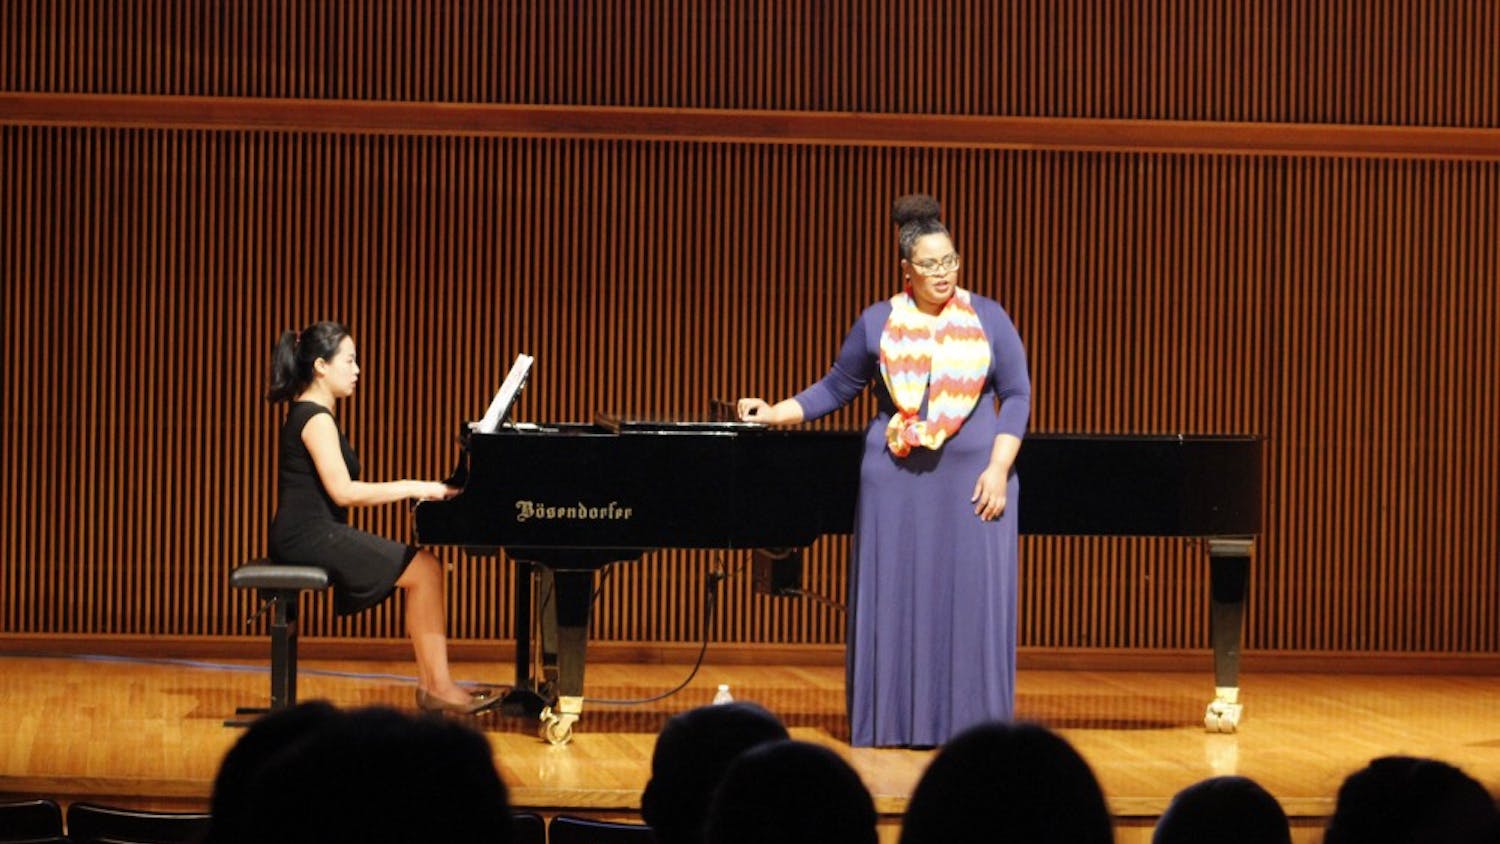 Guest singer Maegan Pollanias and pianist Nina Lee cover a sample of Caribbean art songs composed by Dominique Le Gendre.